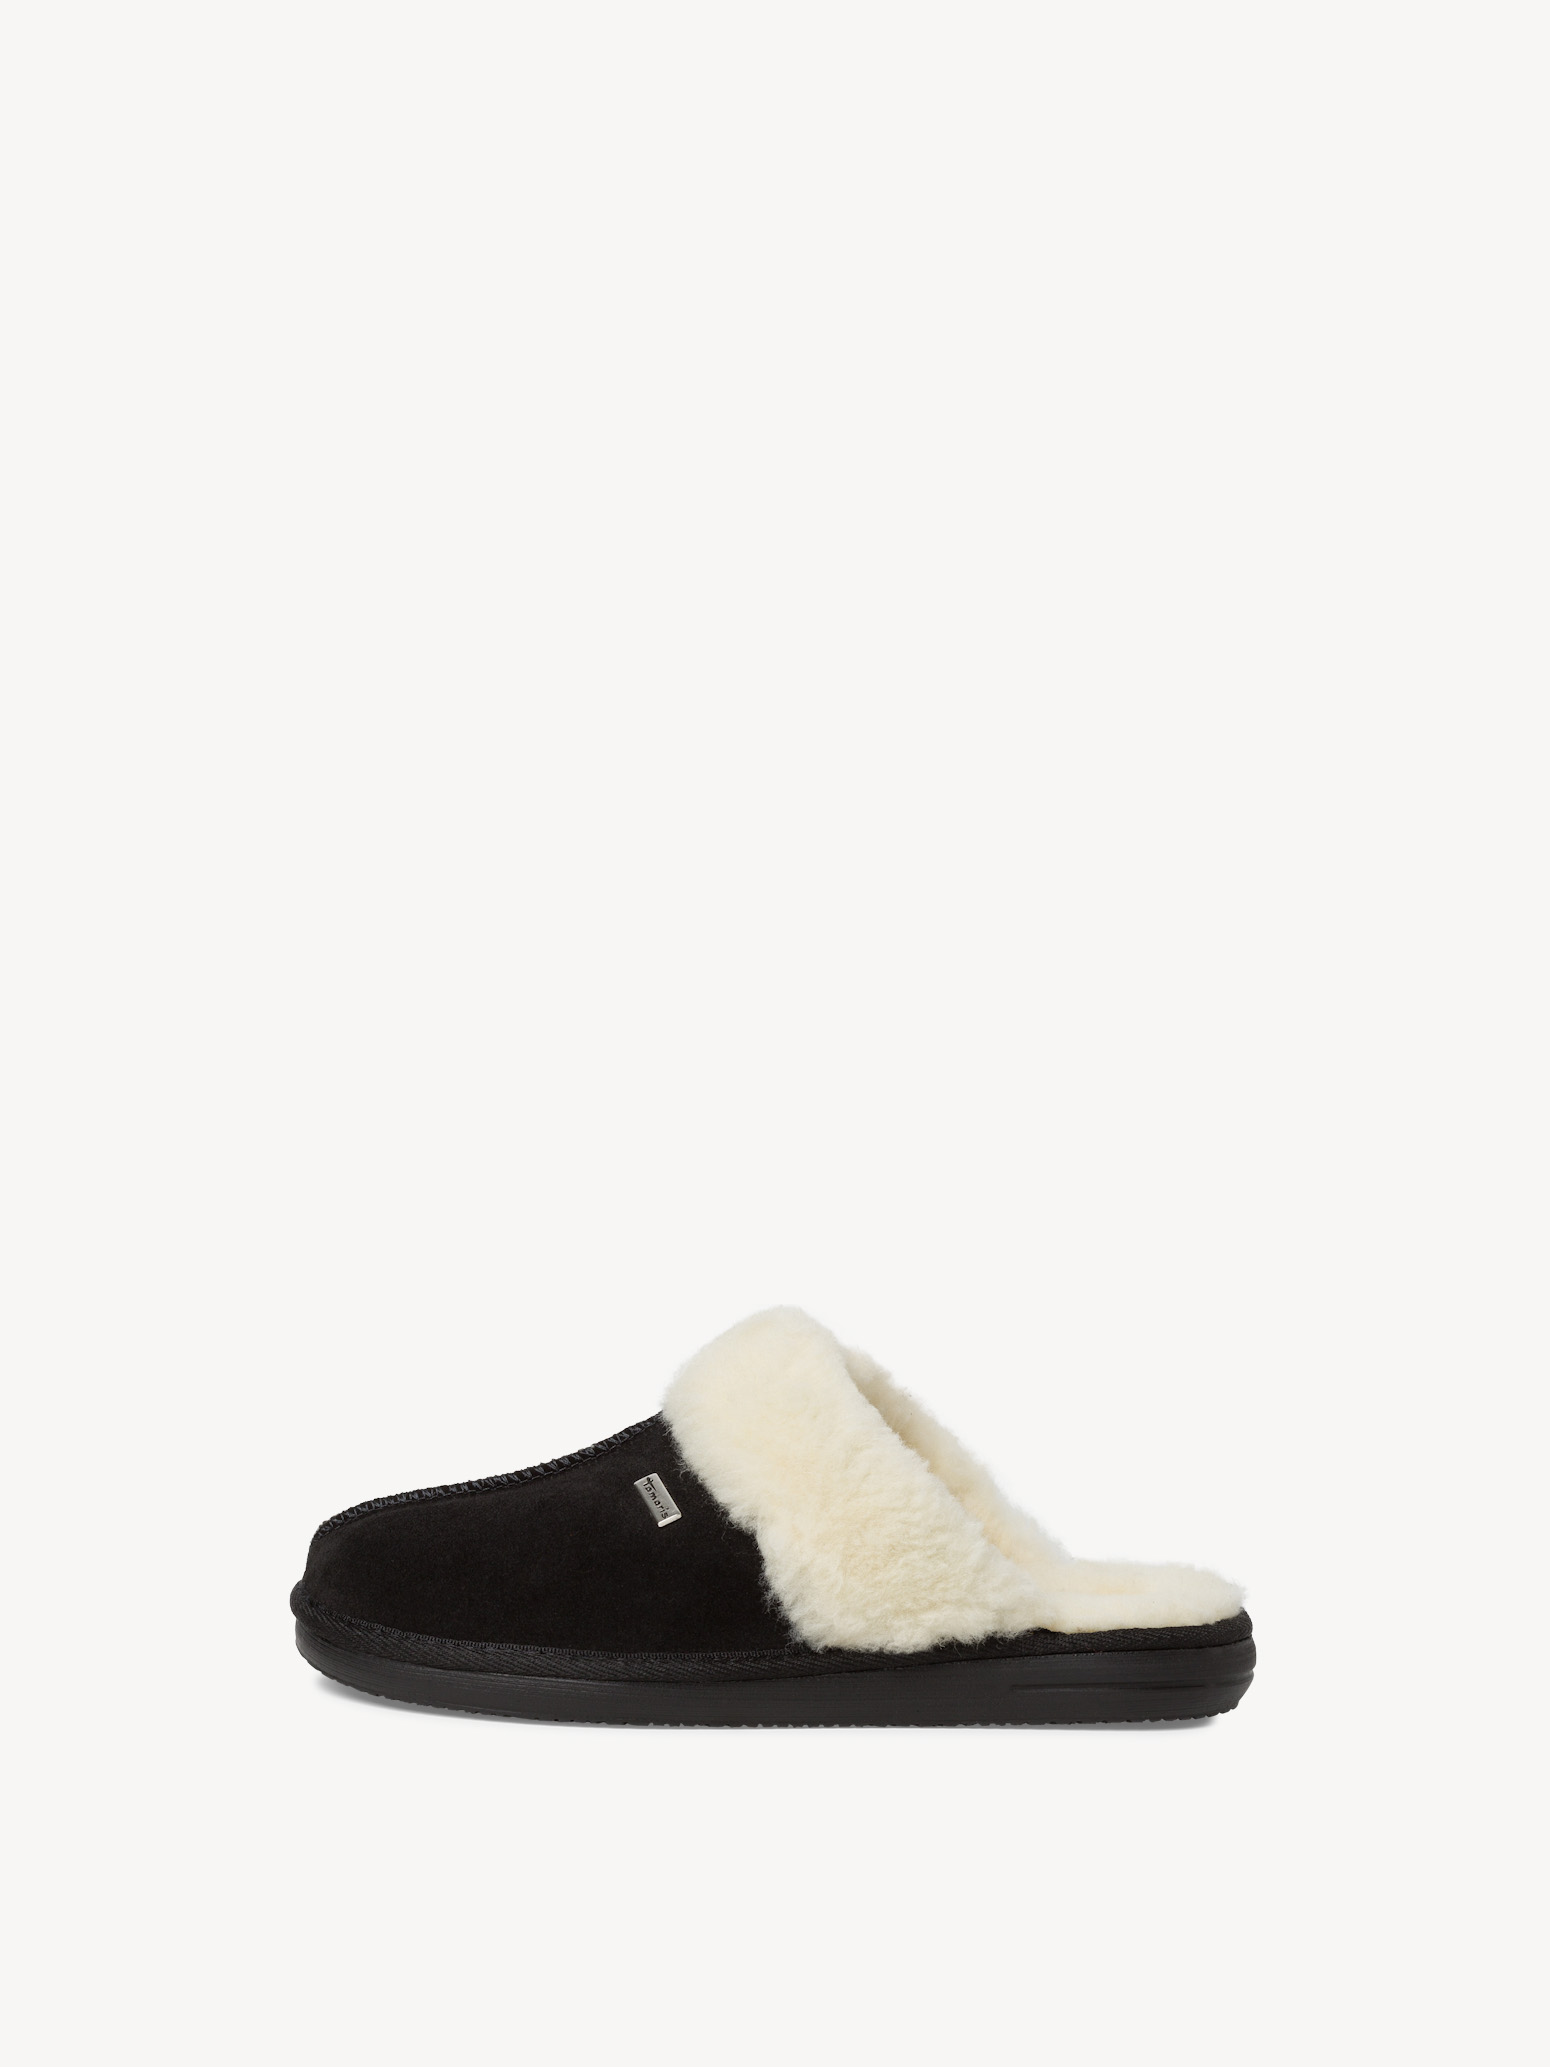 Leather Slippers - black